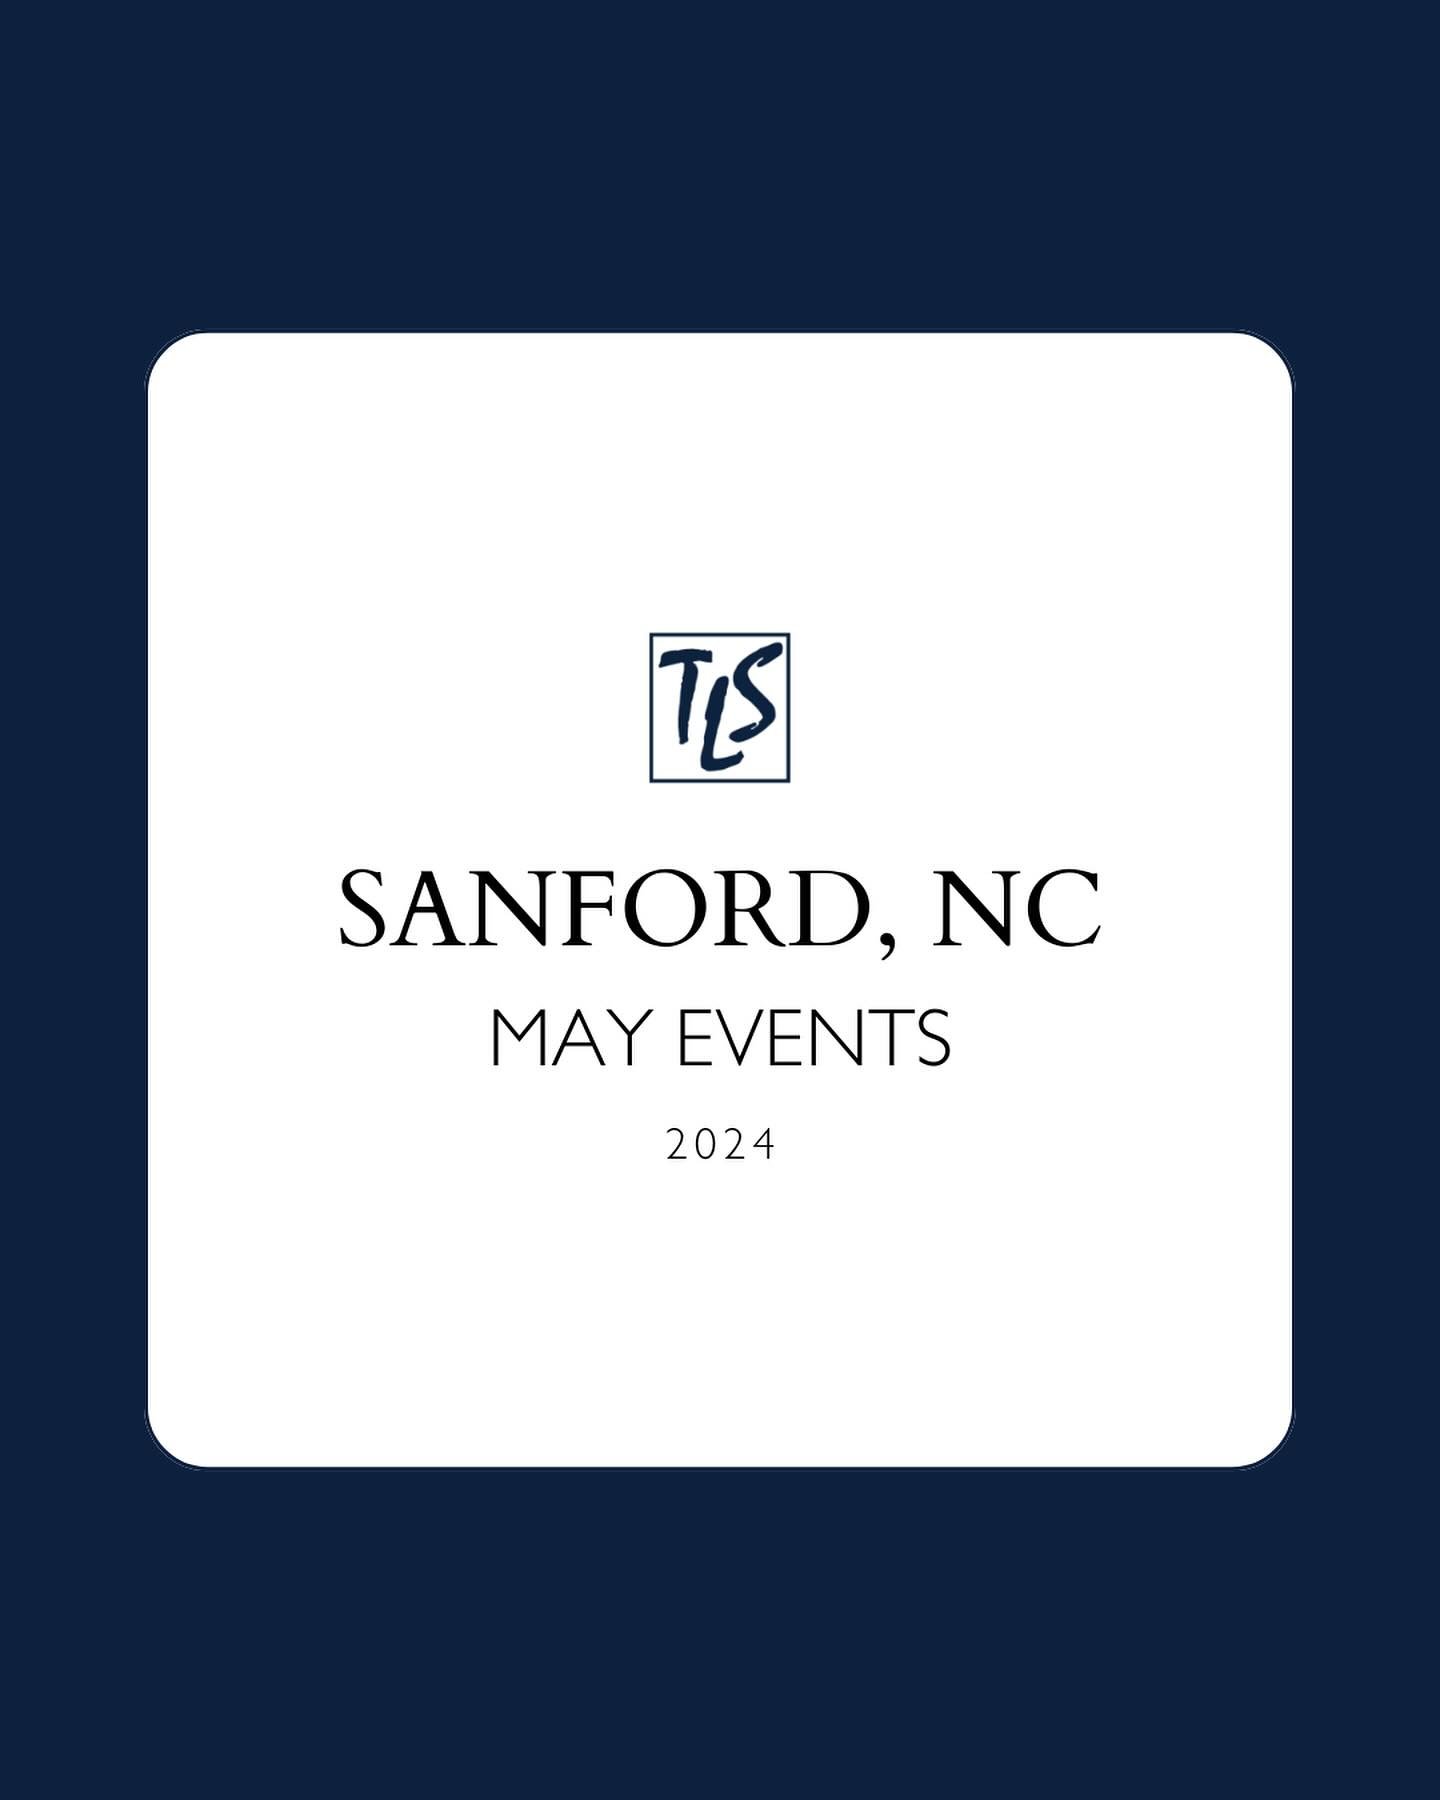 Swipe left to see a calendar full of family-friendly events happening in Sanford this month! 🌸🌞➡️

These events are perfect for enjoying our spring weather in the community! 

Save this post to refer back to throughout the month! 

.
.
.
.
#downtow